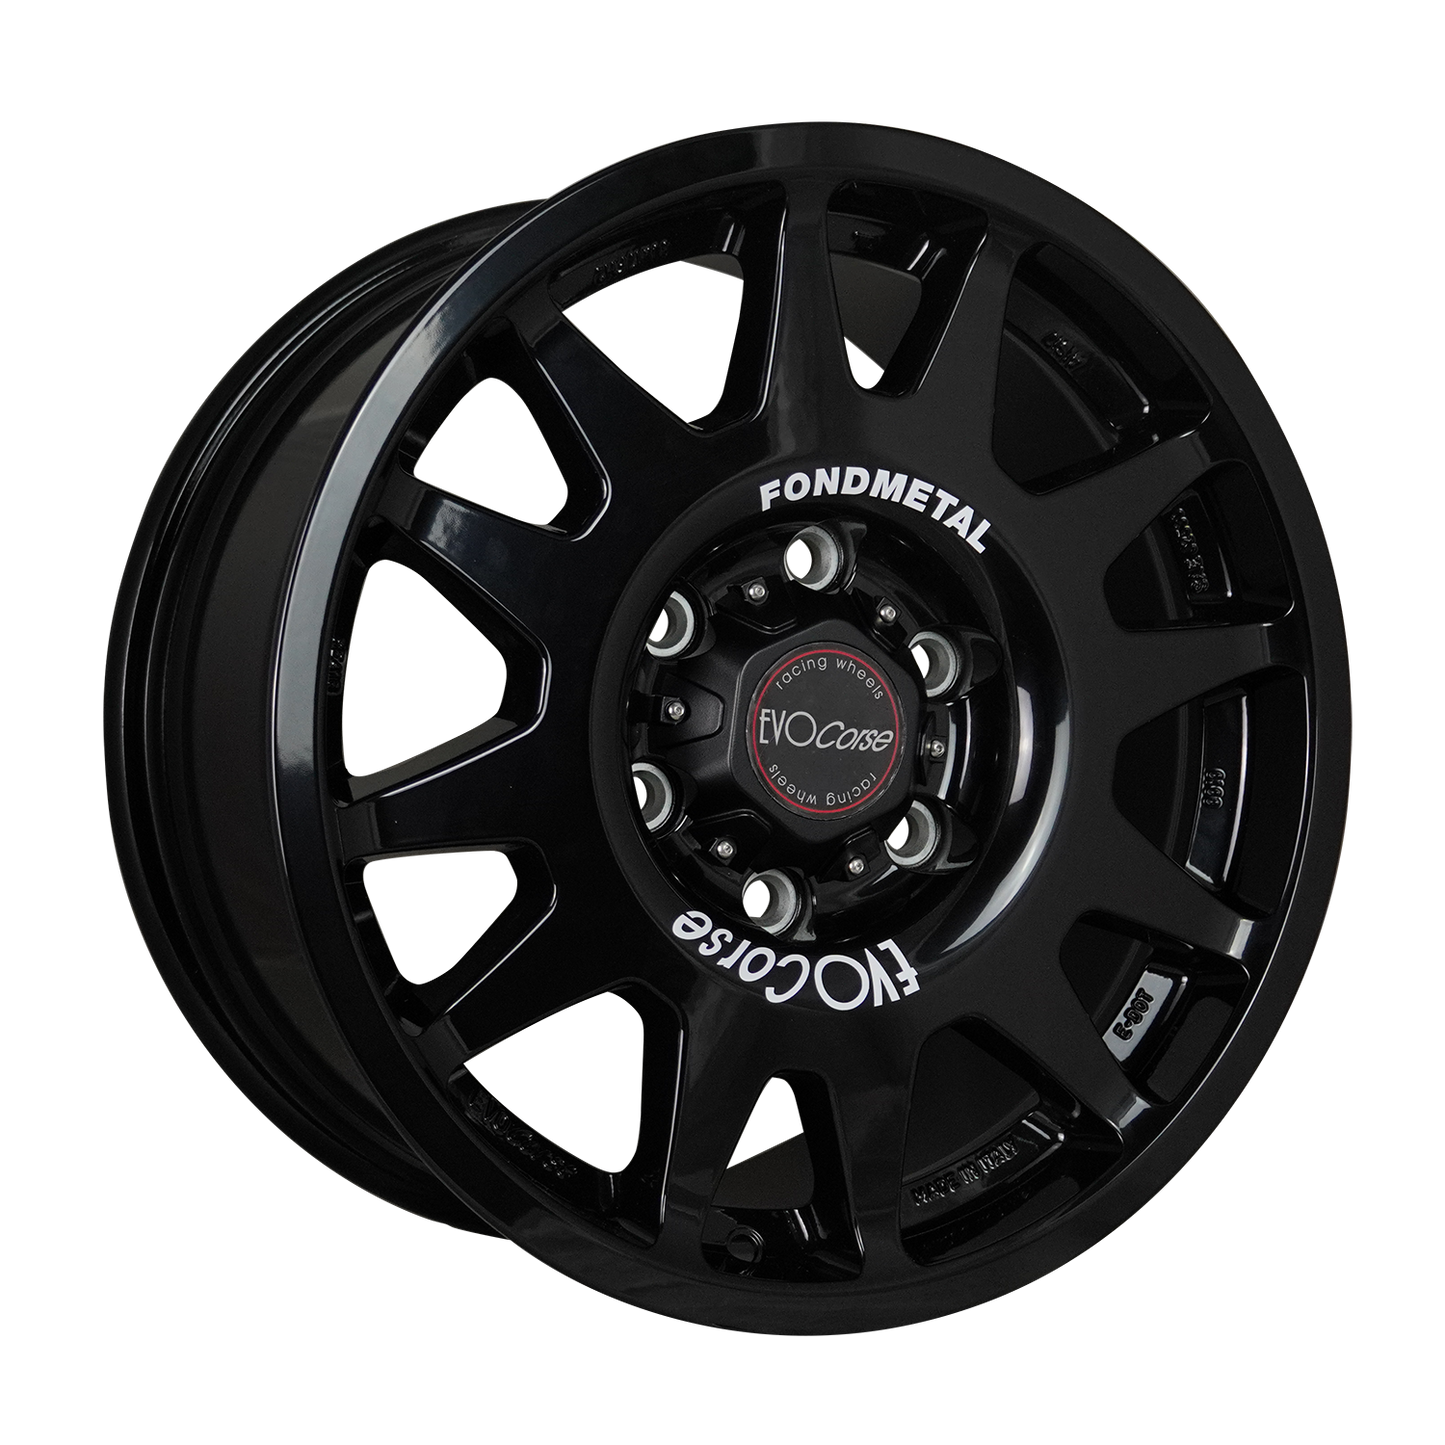 Ineos Grenadier alloy wheel for the grenadier, matt black close-up by Evo Corse, made in Italy, 17 x 8 inch 45 offset, an alloy race wheel off-road best offset and load rating for the grenadier by Ineos , suits BFG Toyo Falken GoodYear etc